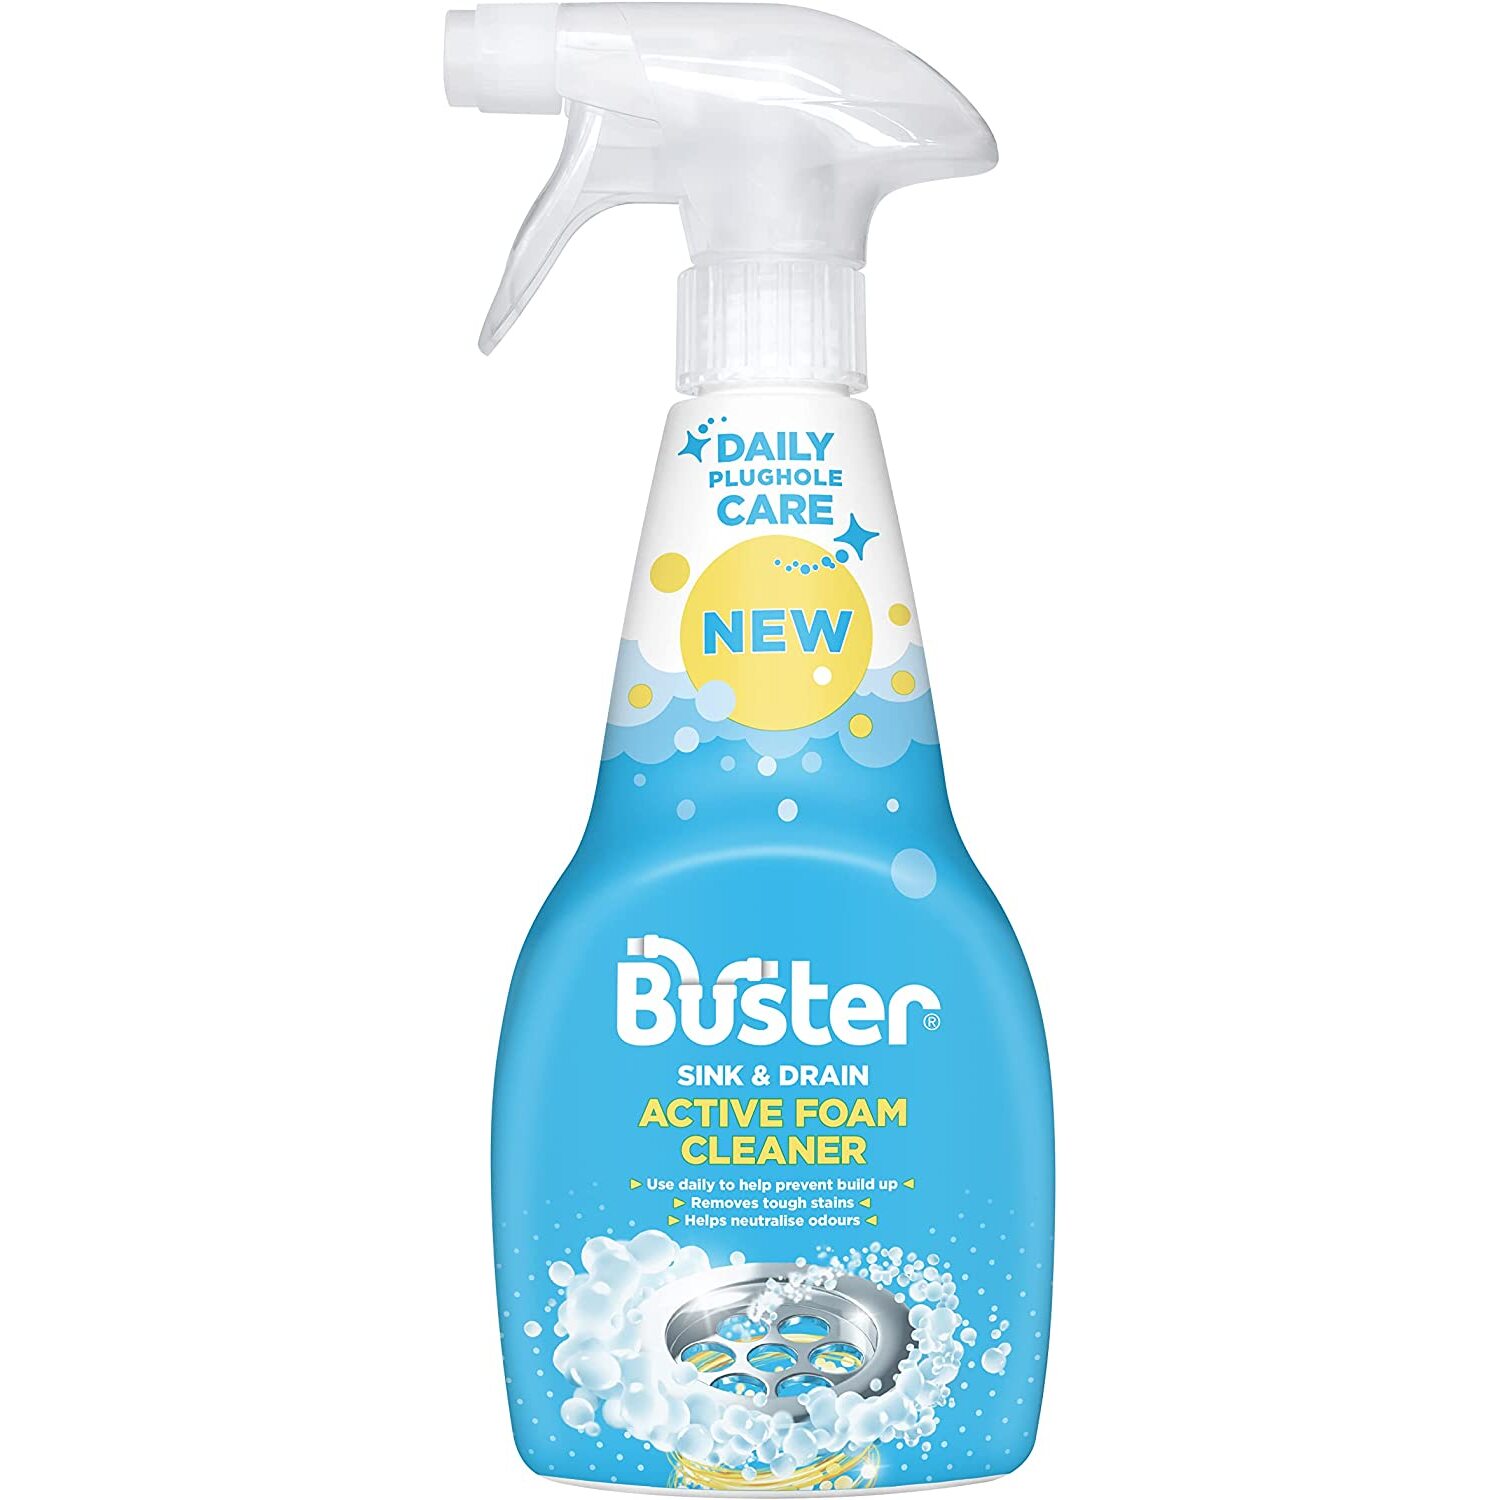 Buster Sink and Drain Active Foam Cleaner 500ml Image